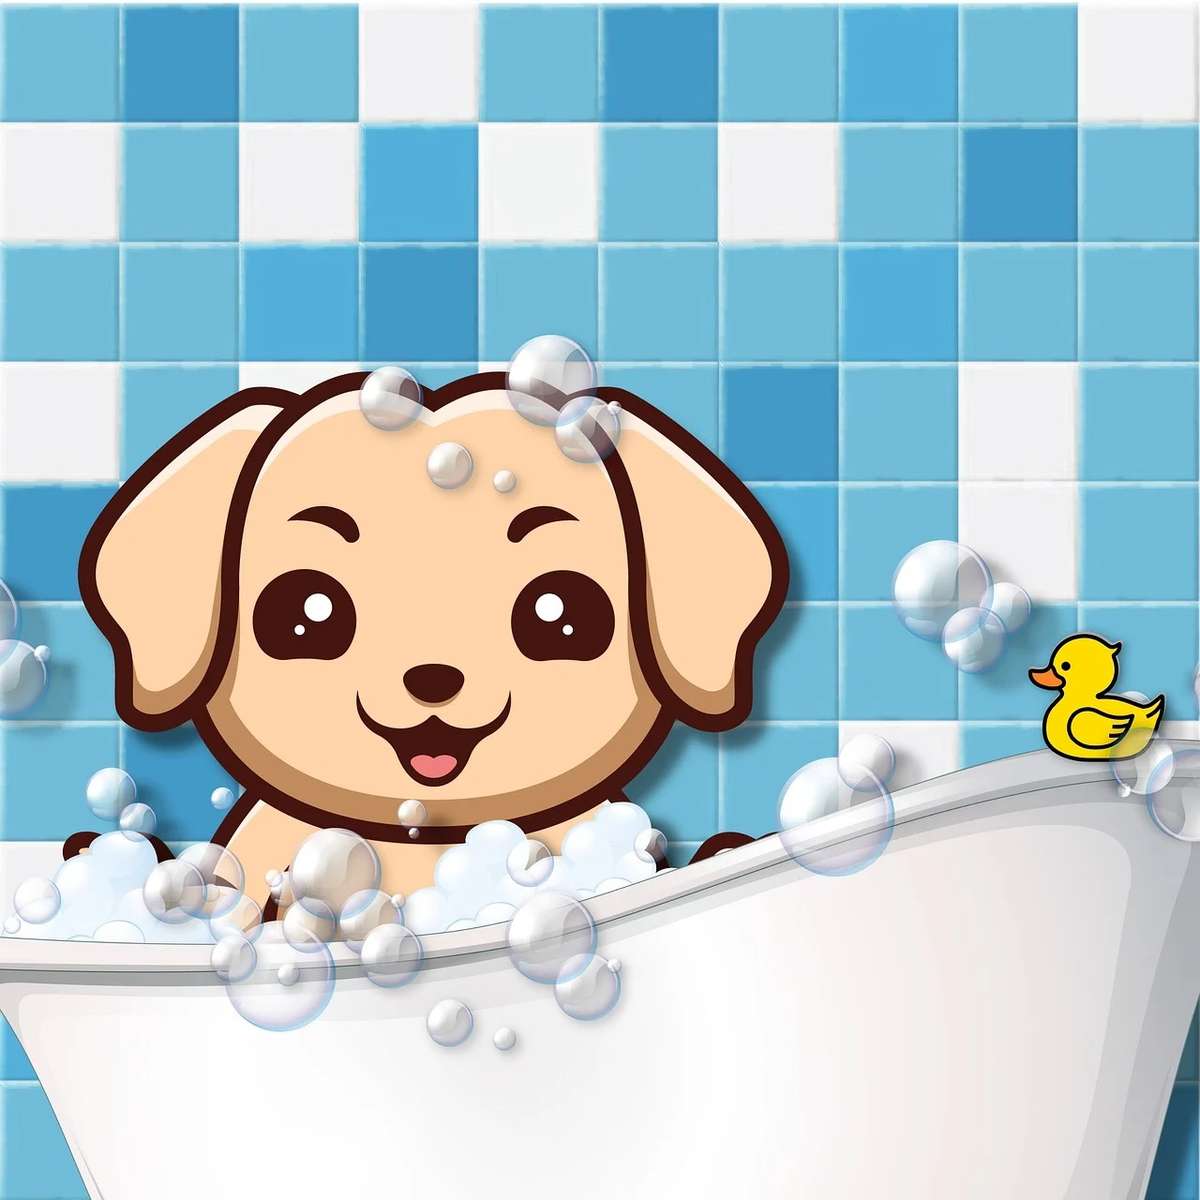 Dog in the bathtub online puzzle